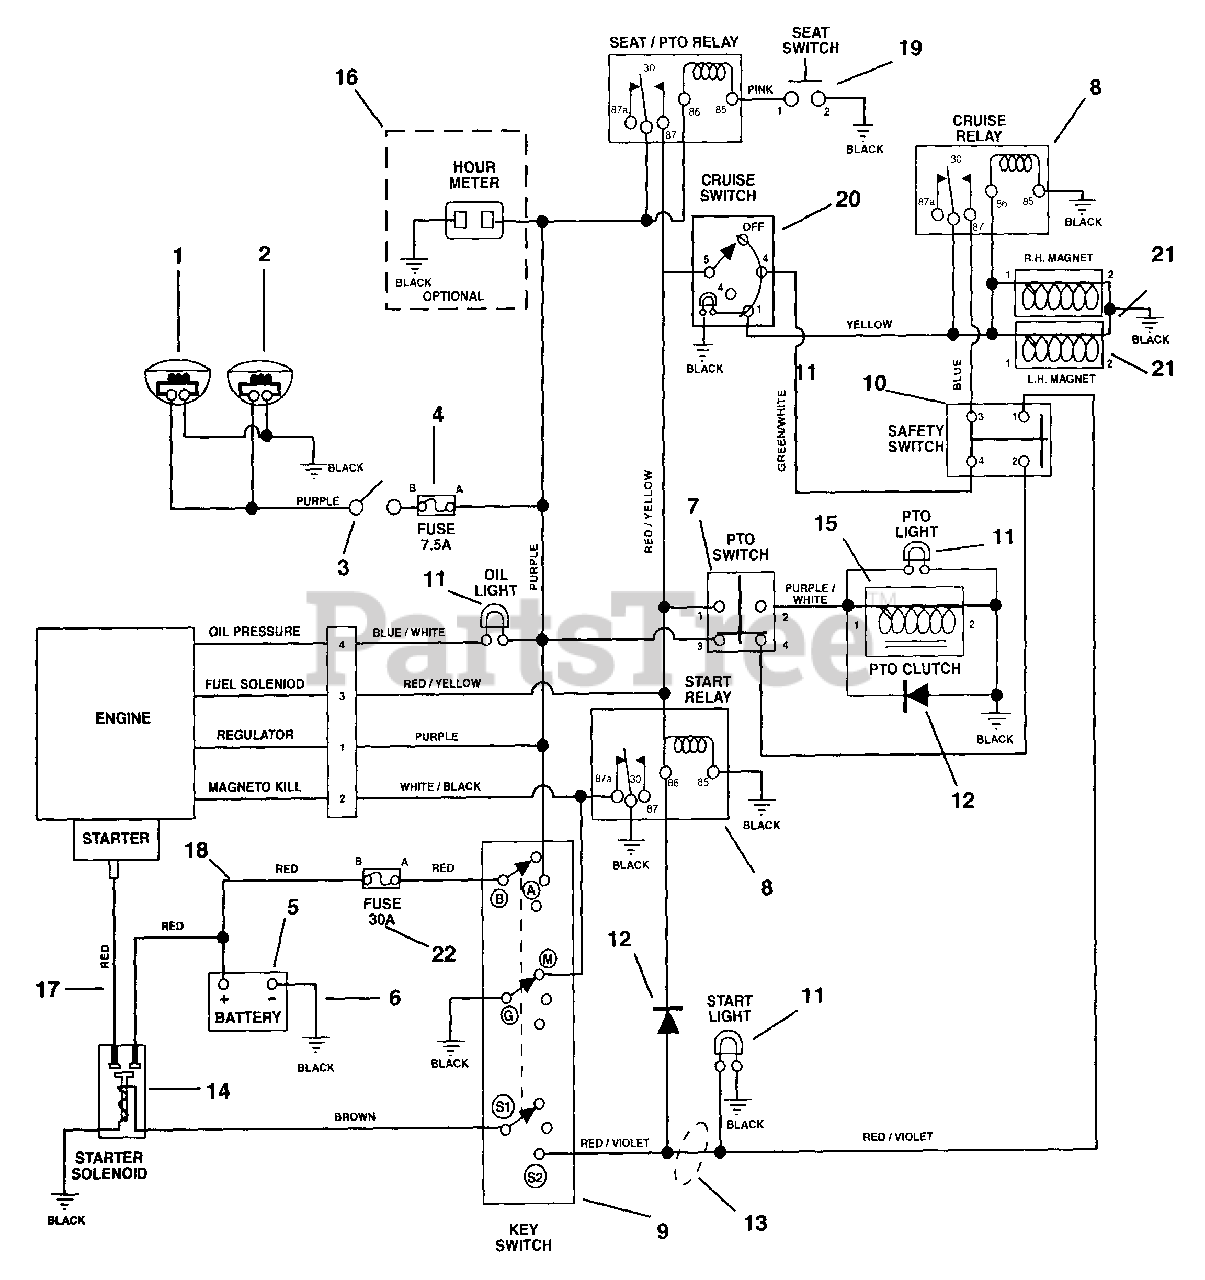 Briggs And Stratton Wiring Diagram 18 Hp from www.partstree.com